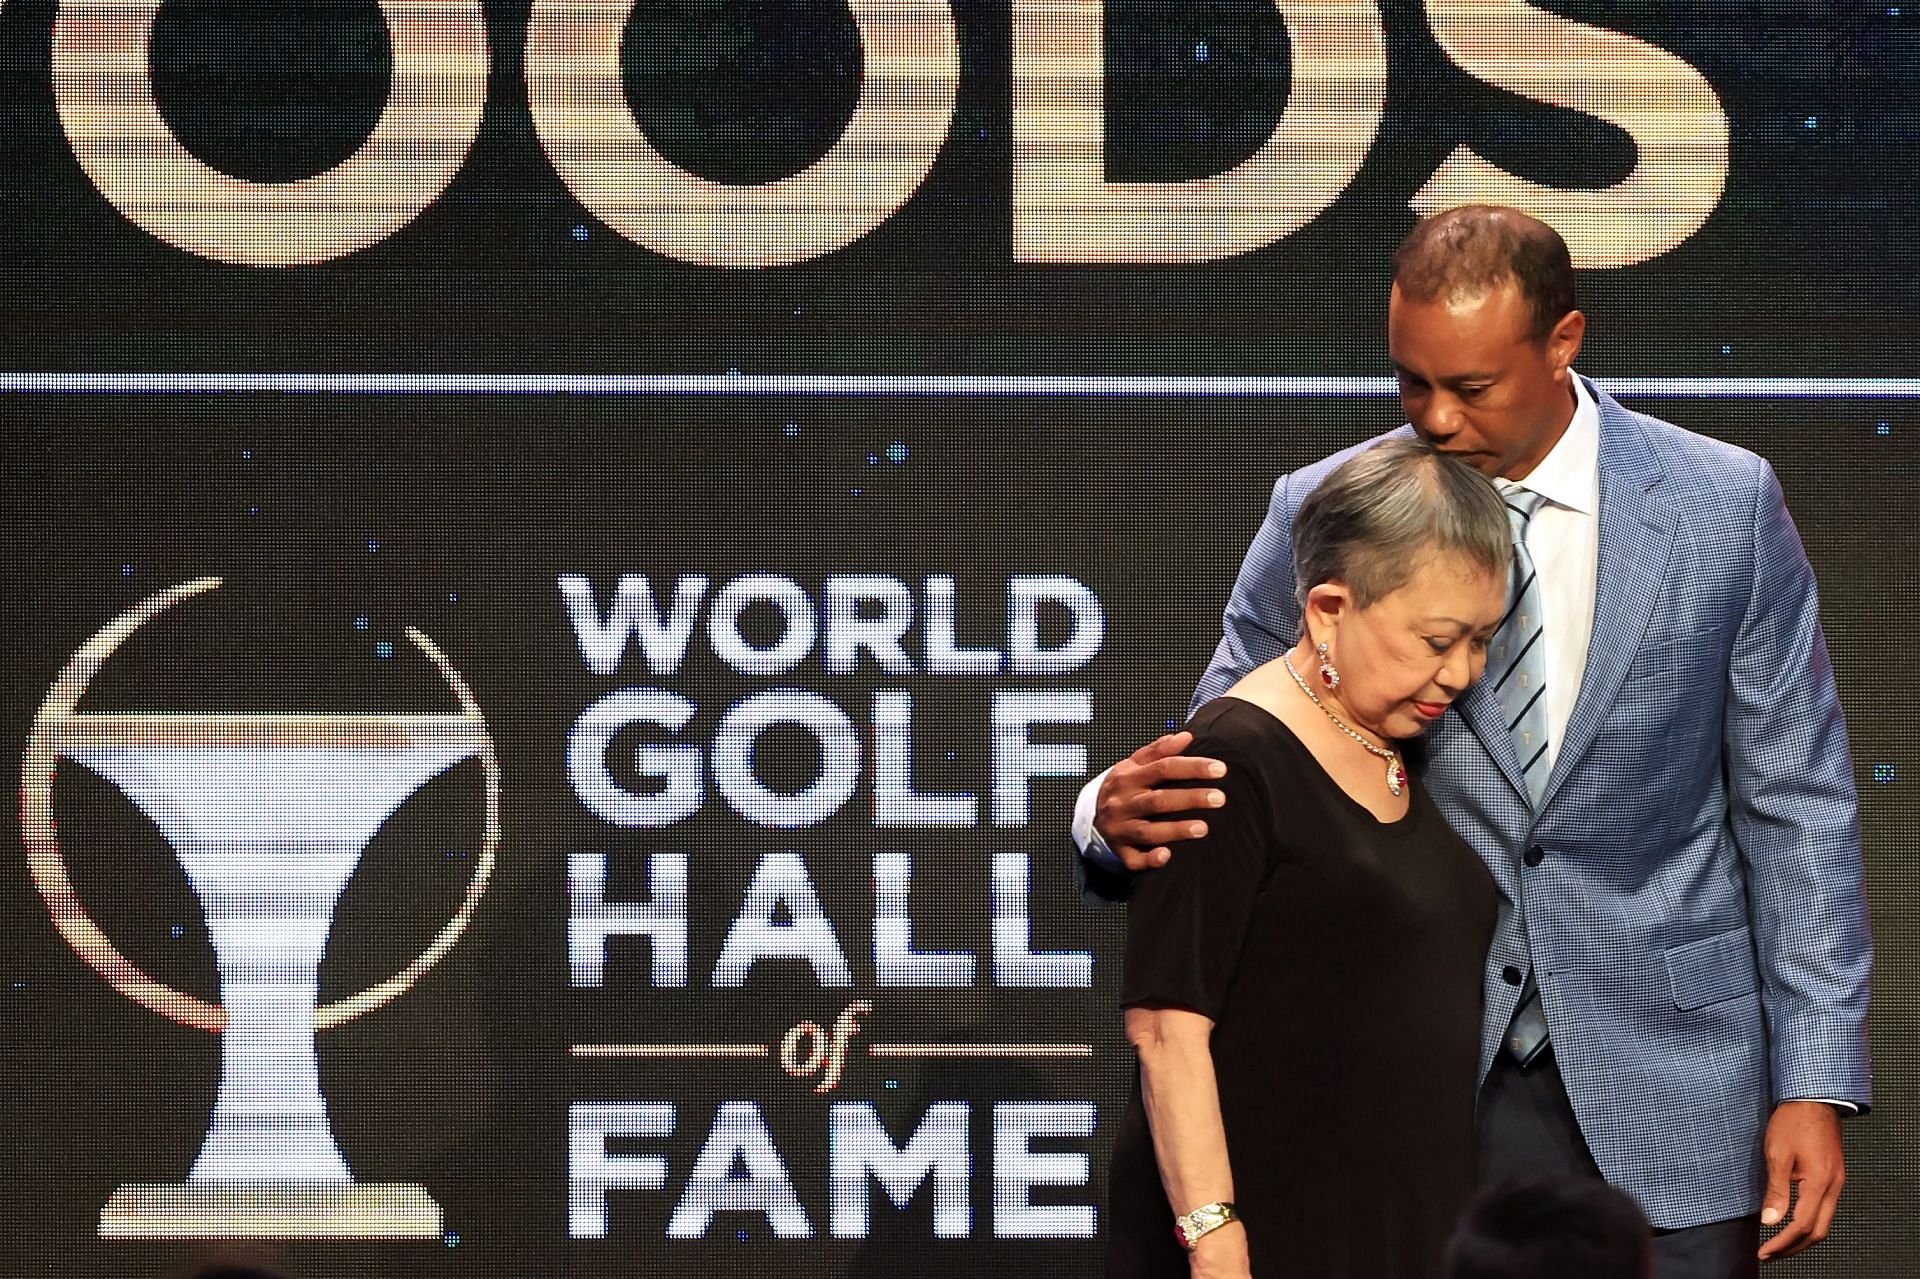 2022 World Golf Hall of Fame Induction